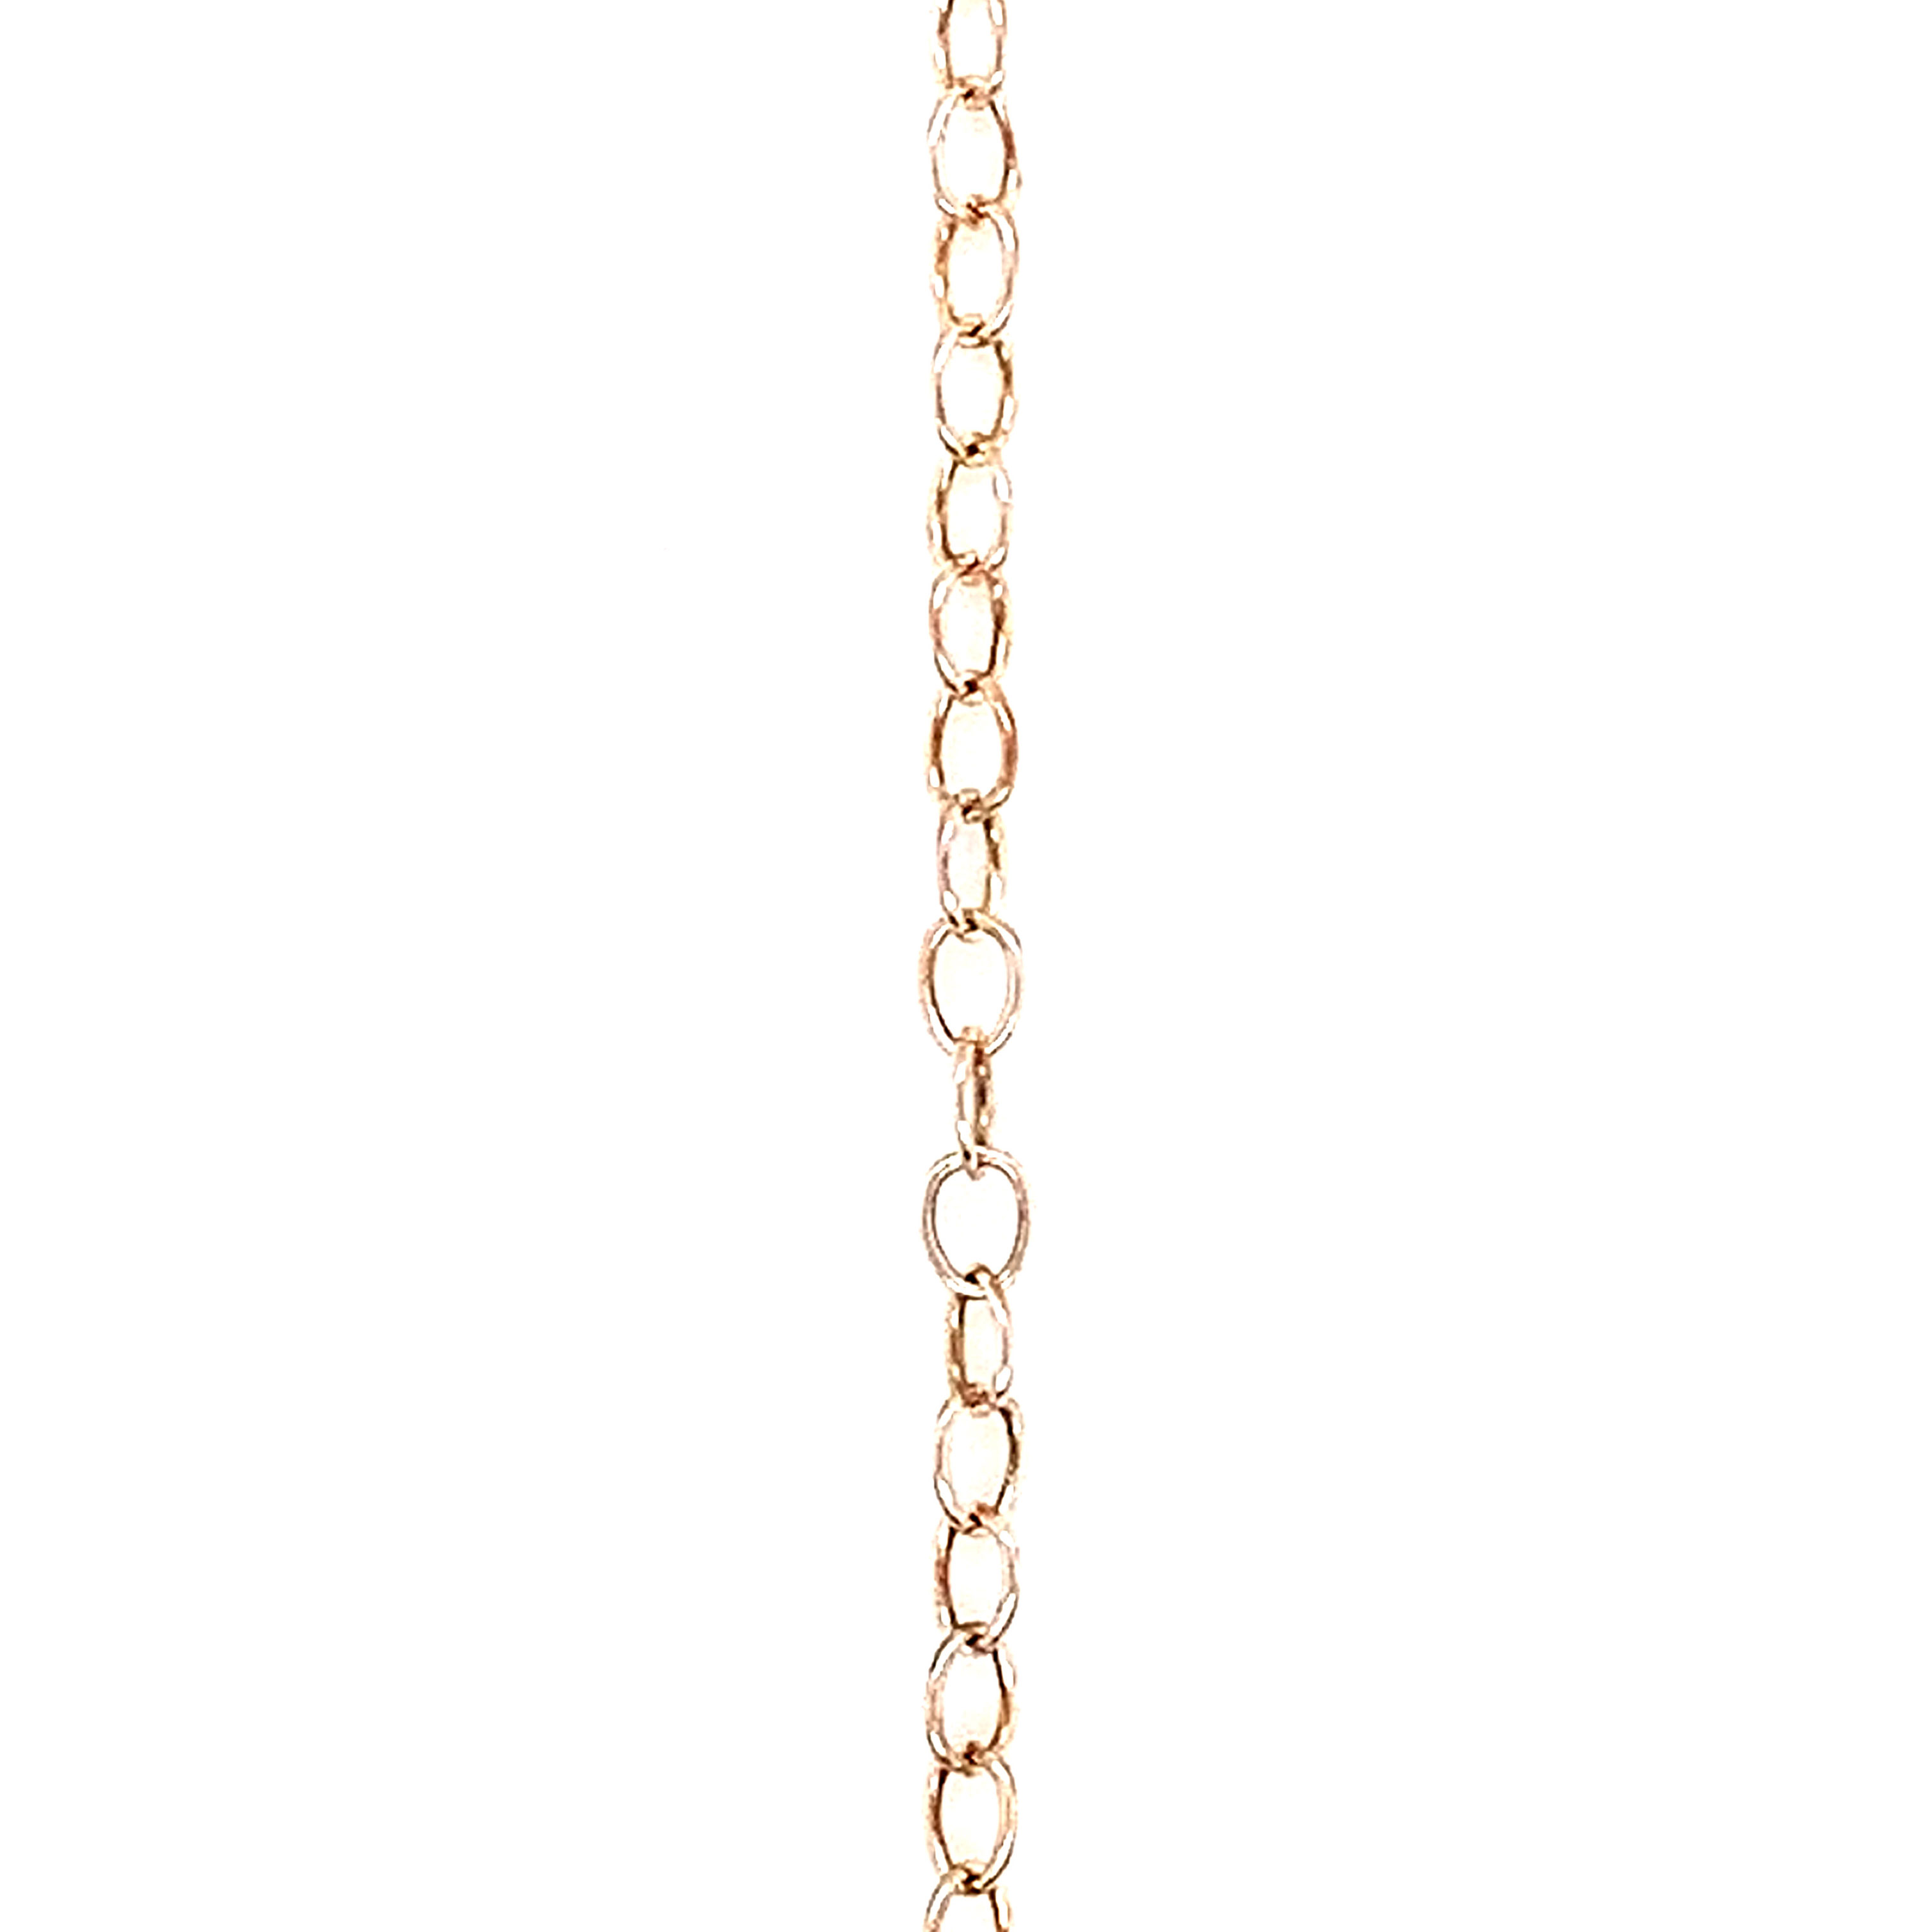 2mm Link Extension Chain - Sterling Silver - Price Per Foot